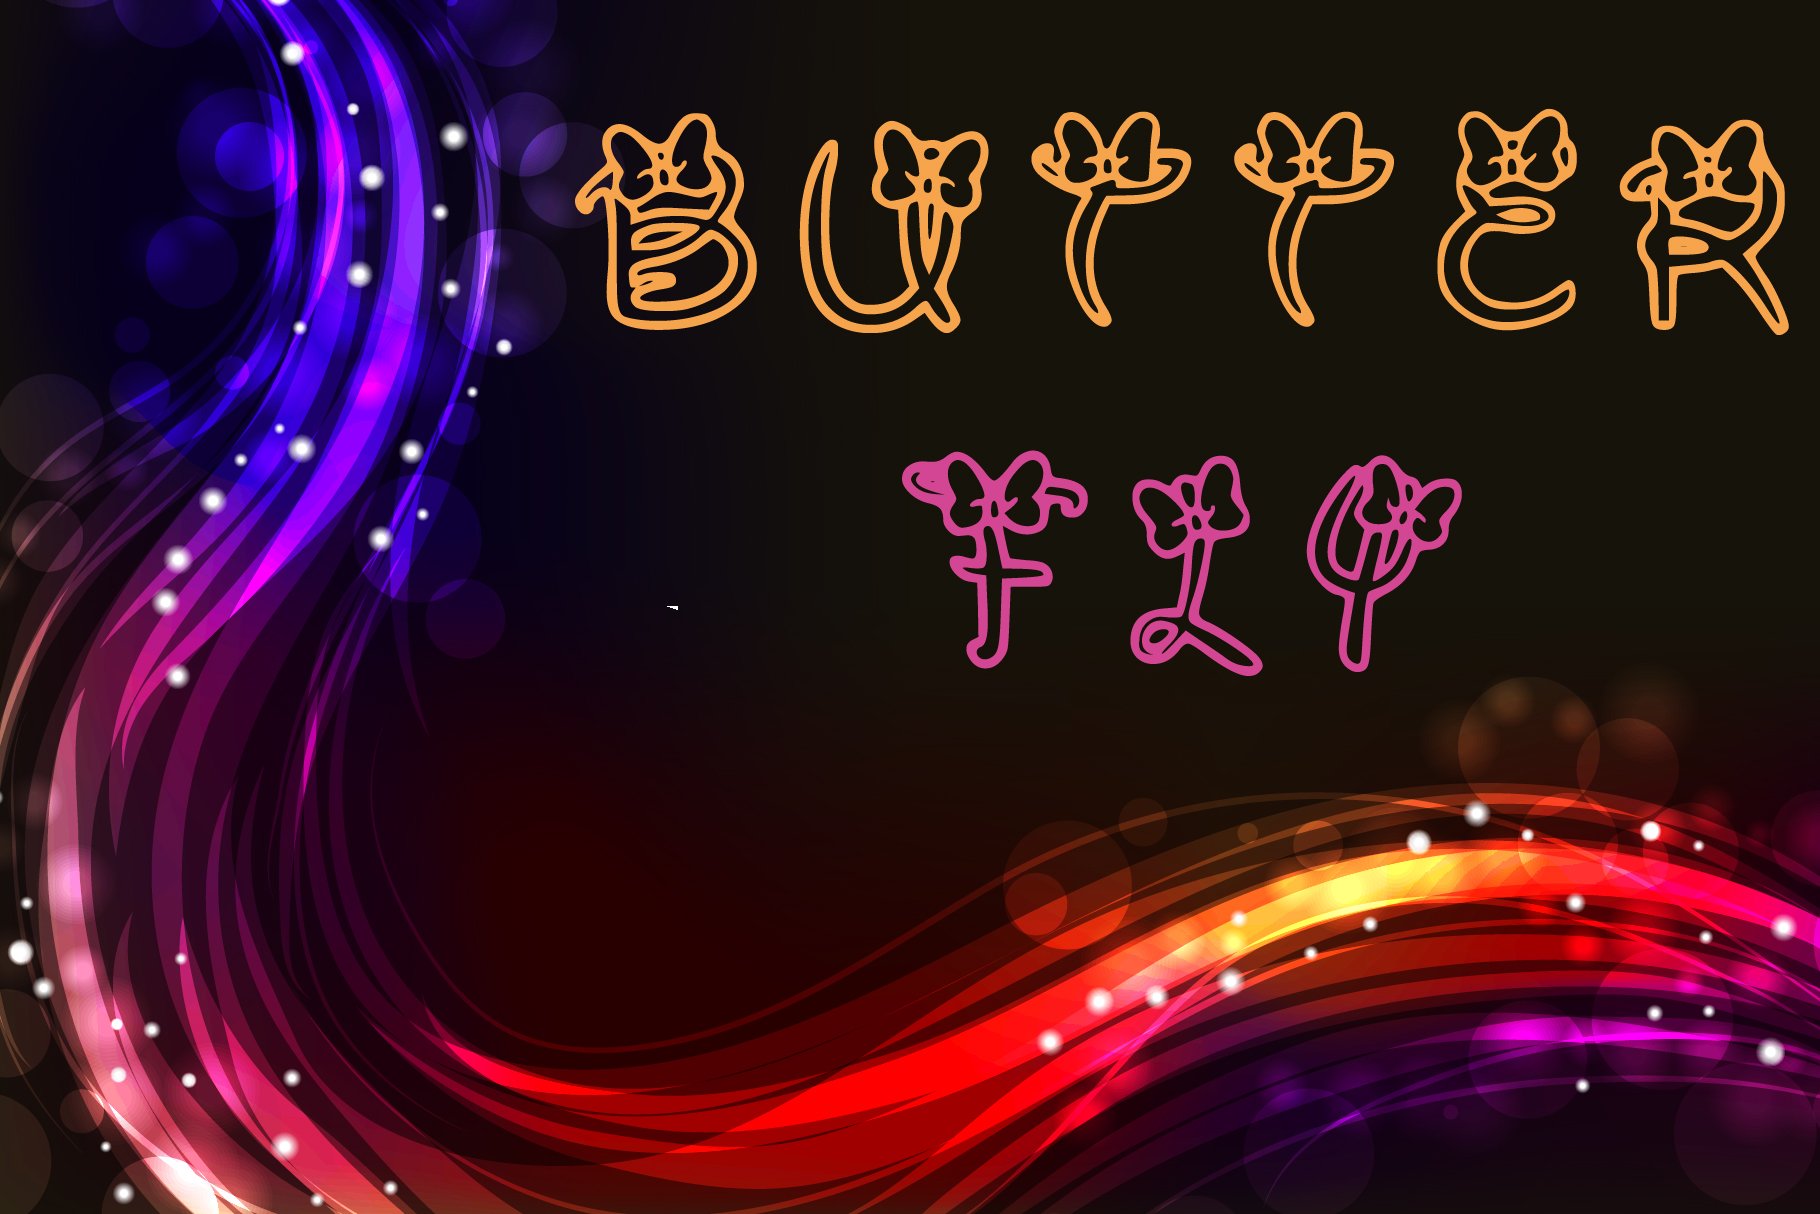 ButterFly Font cover image.